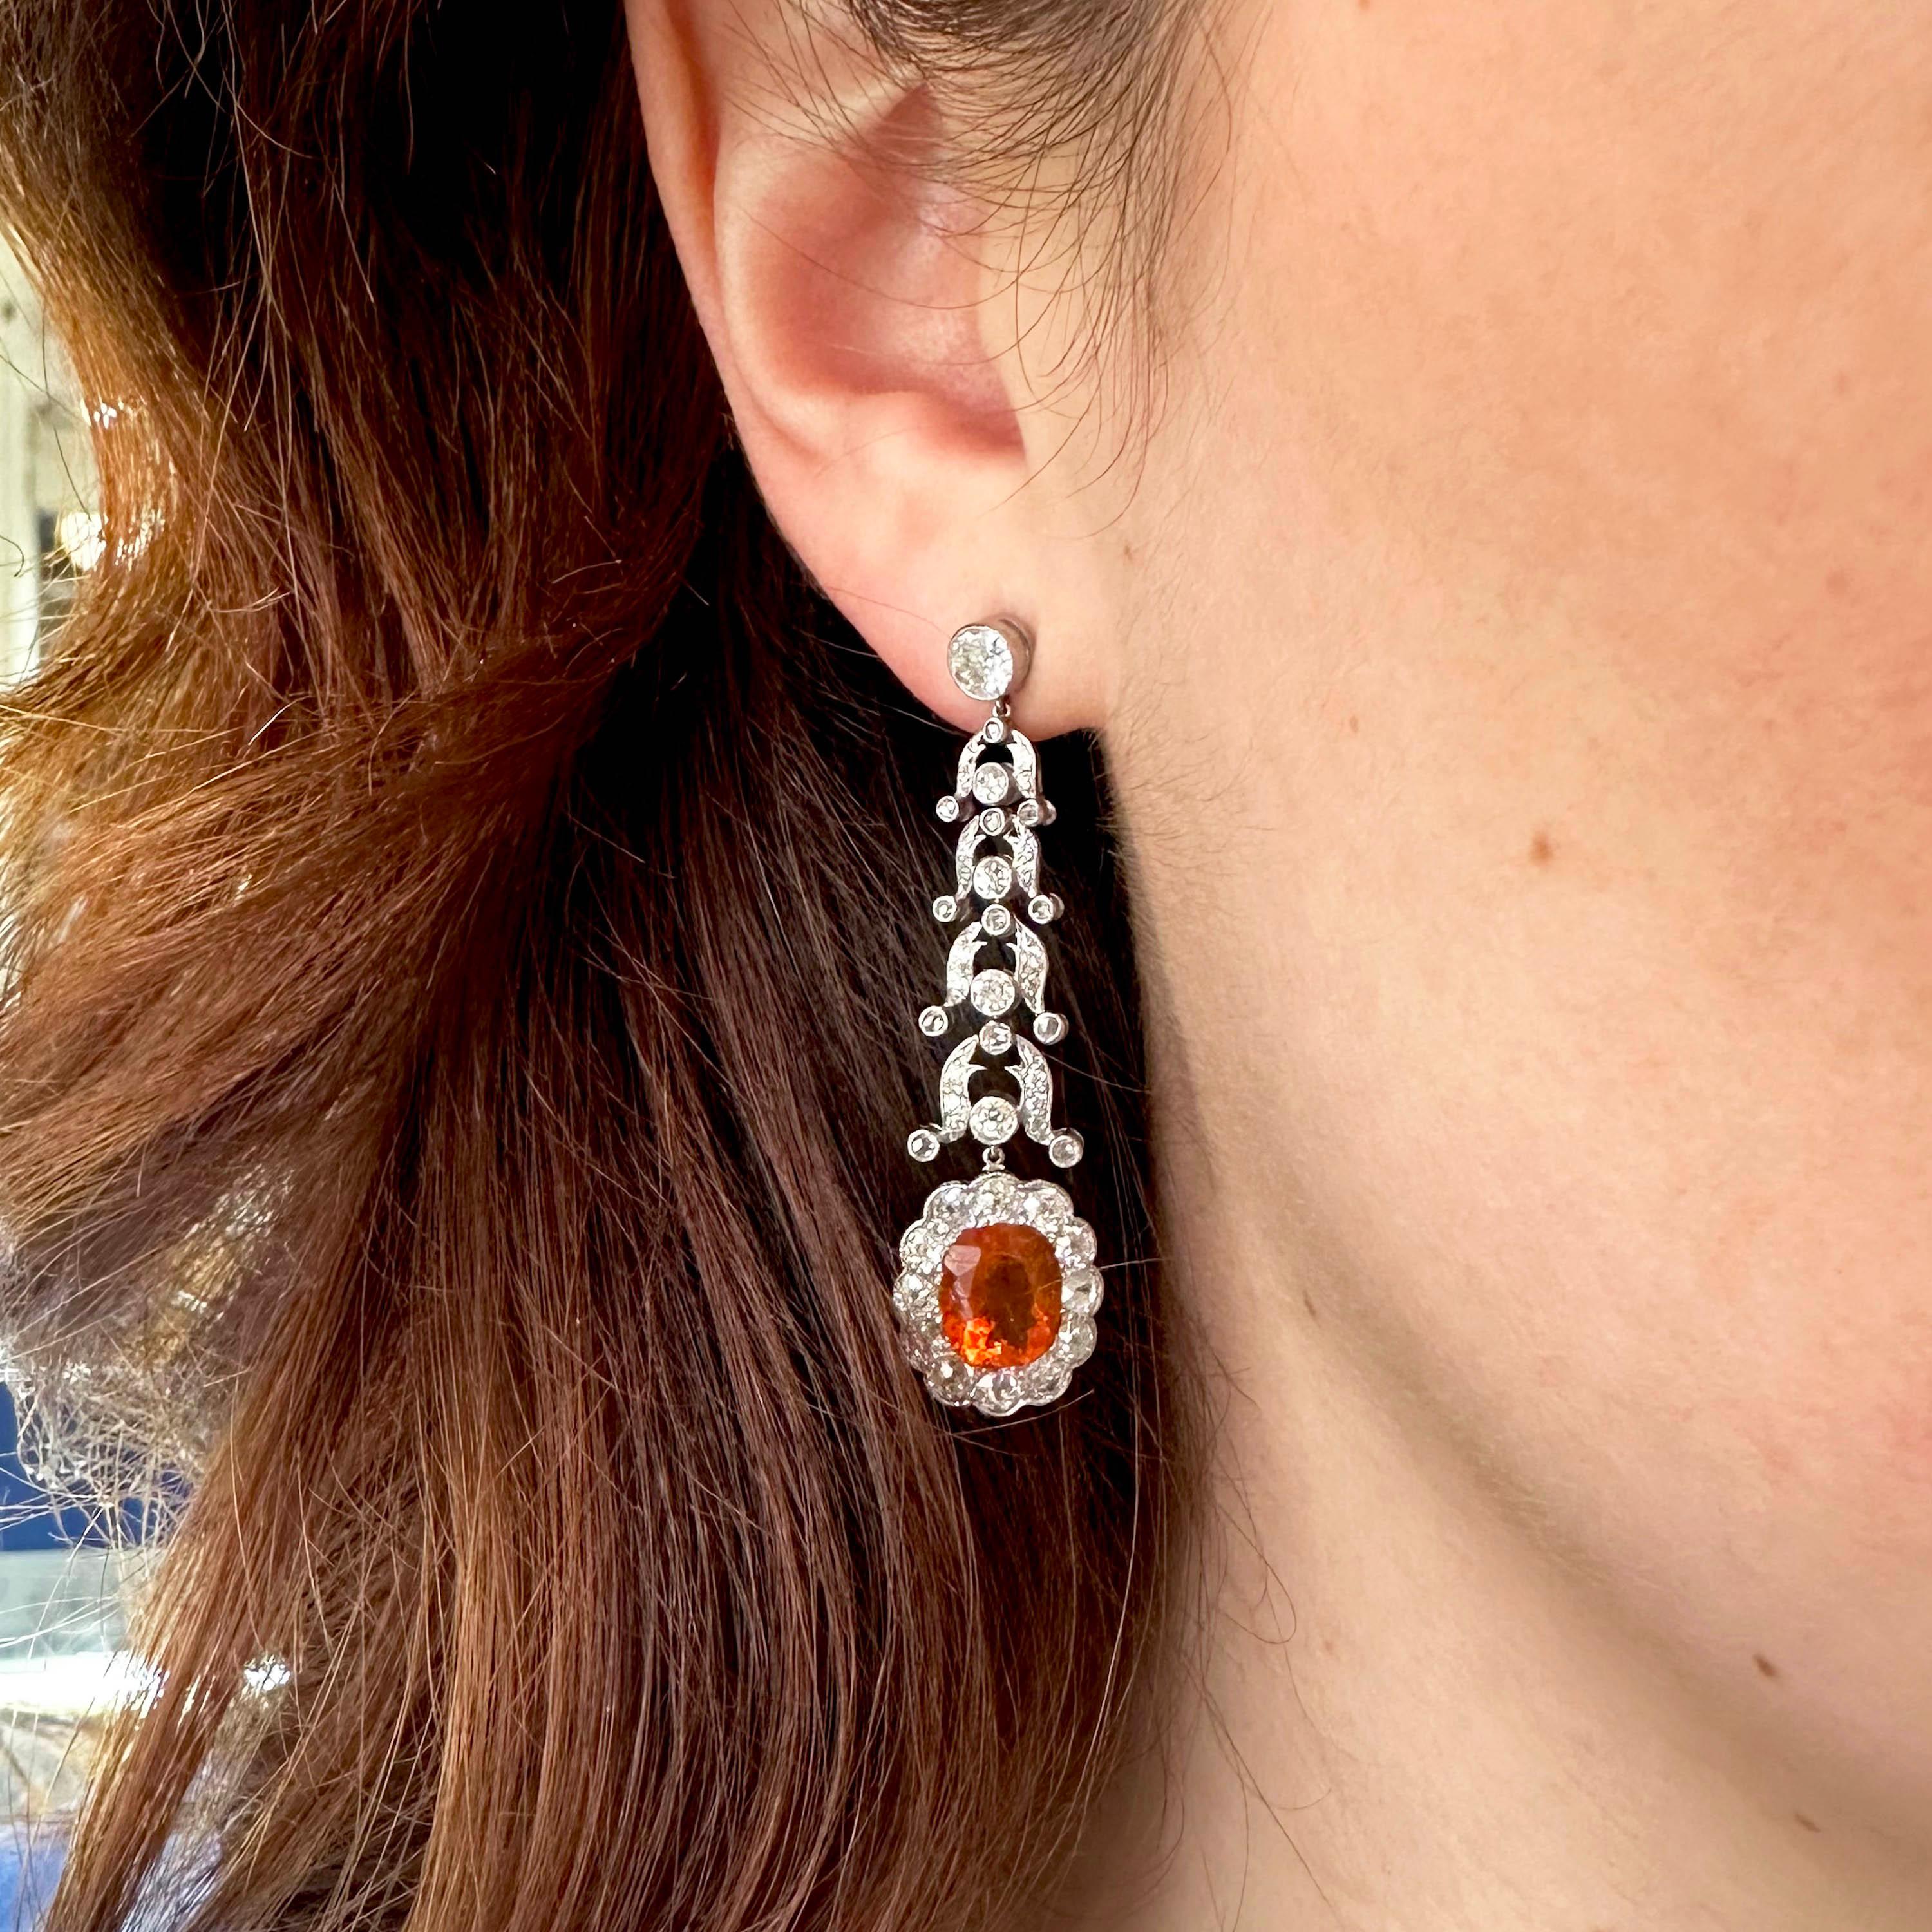 Oval Cut Garrards Fire Opal Diamond and Platinum Drop Earrings and Negligee Pendant Set For Sale